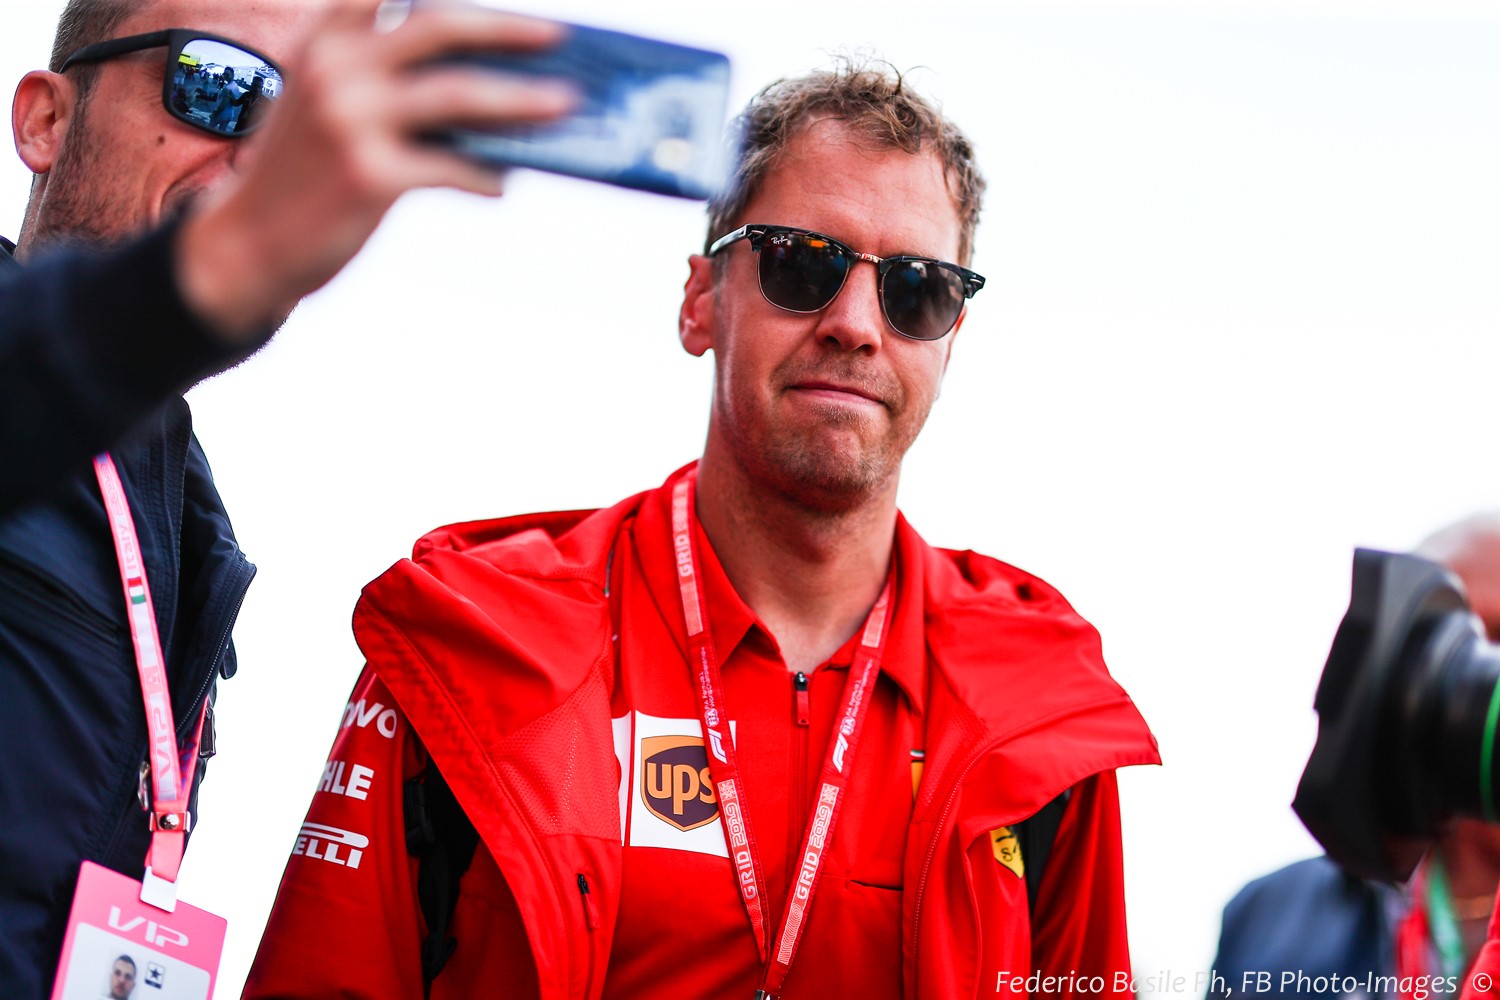 Vettel has to start thinking what to plant in his garden